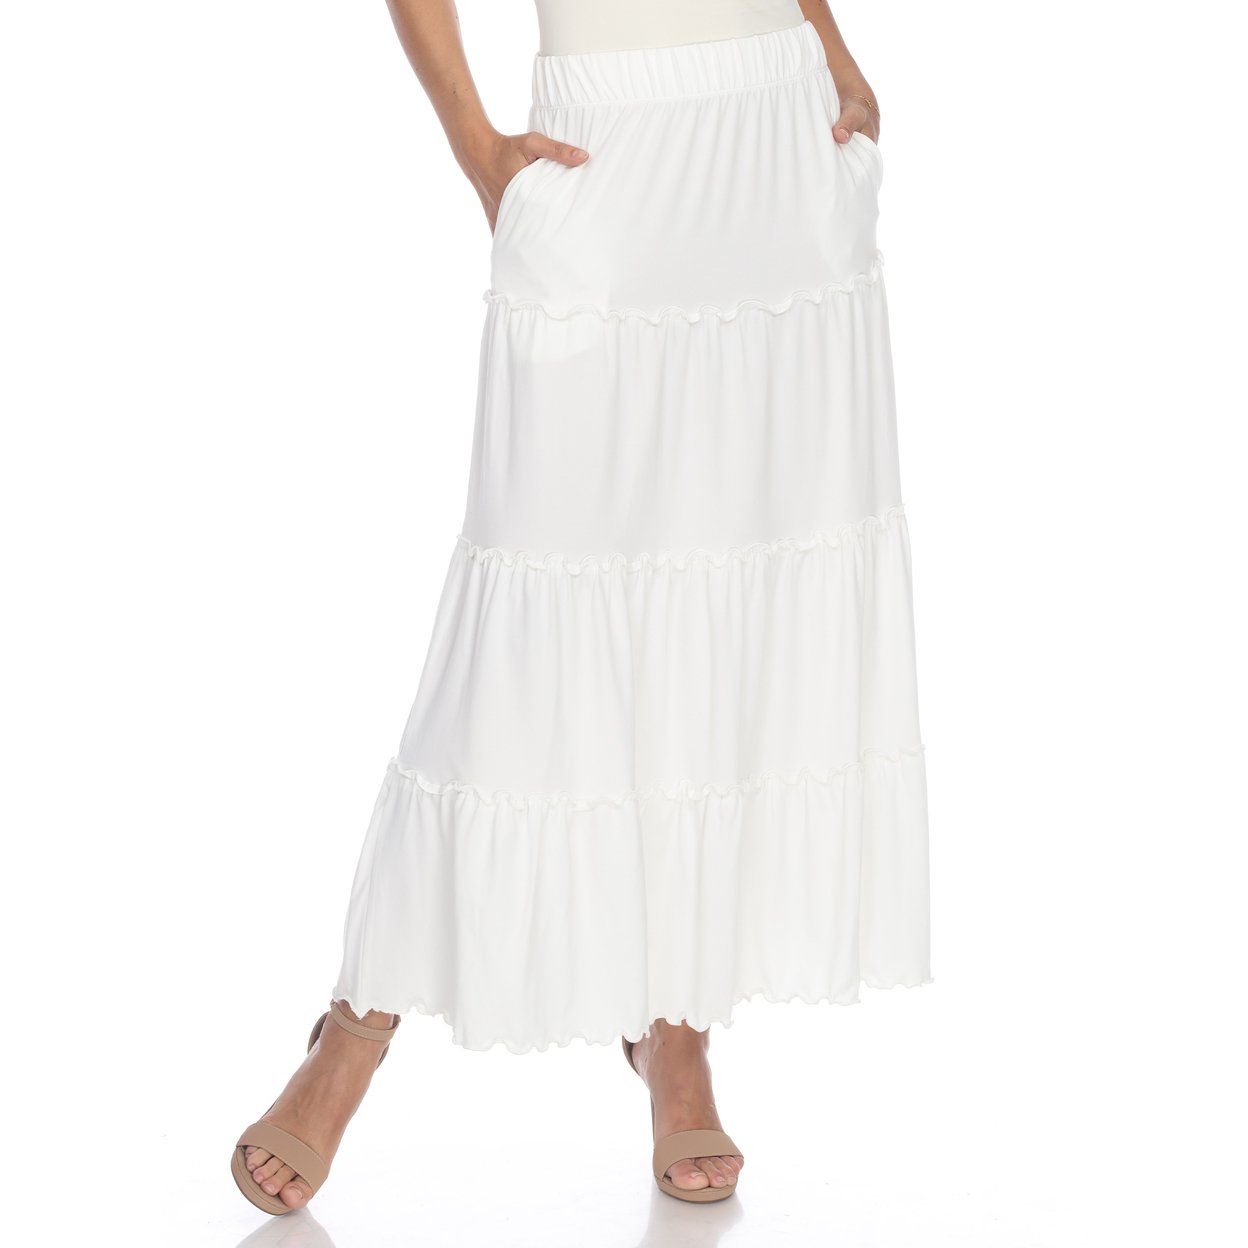 White Mark Women's Tiered Maxi Skirt With Pockets - White, X-large